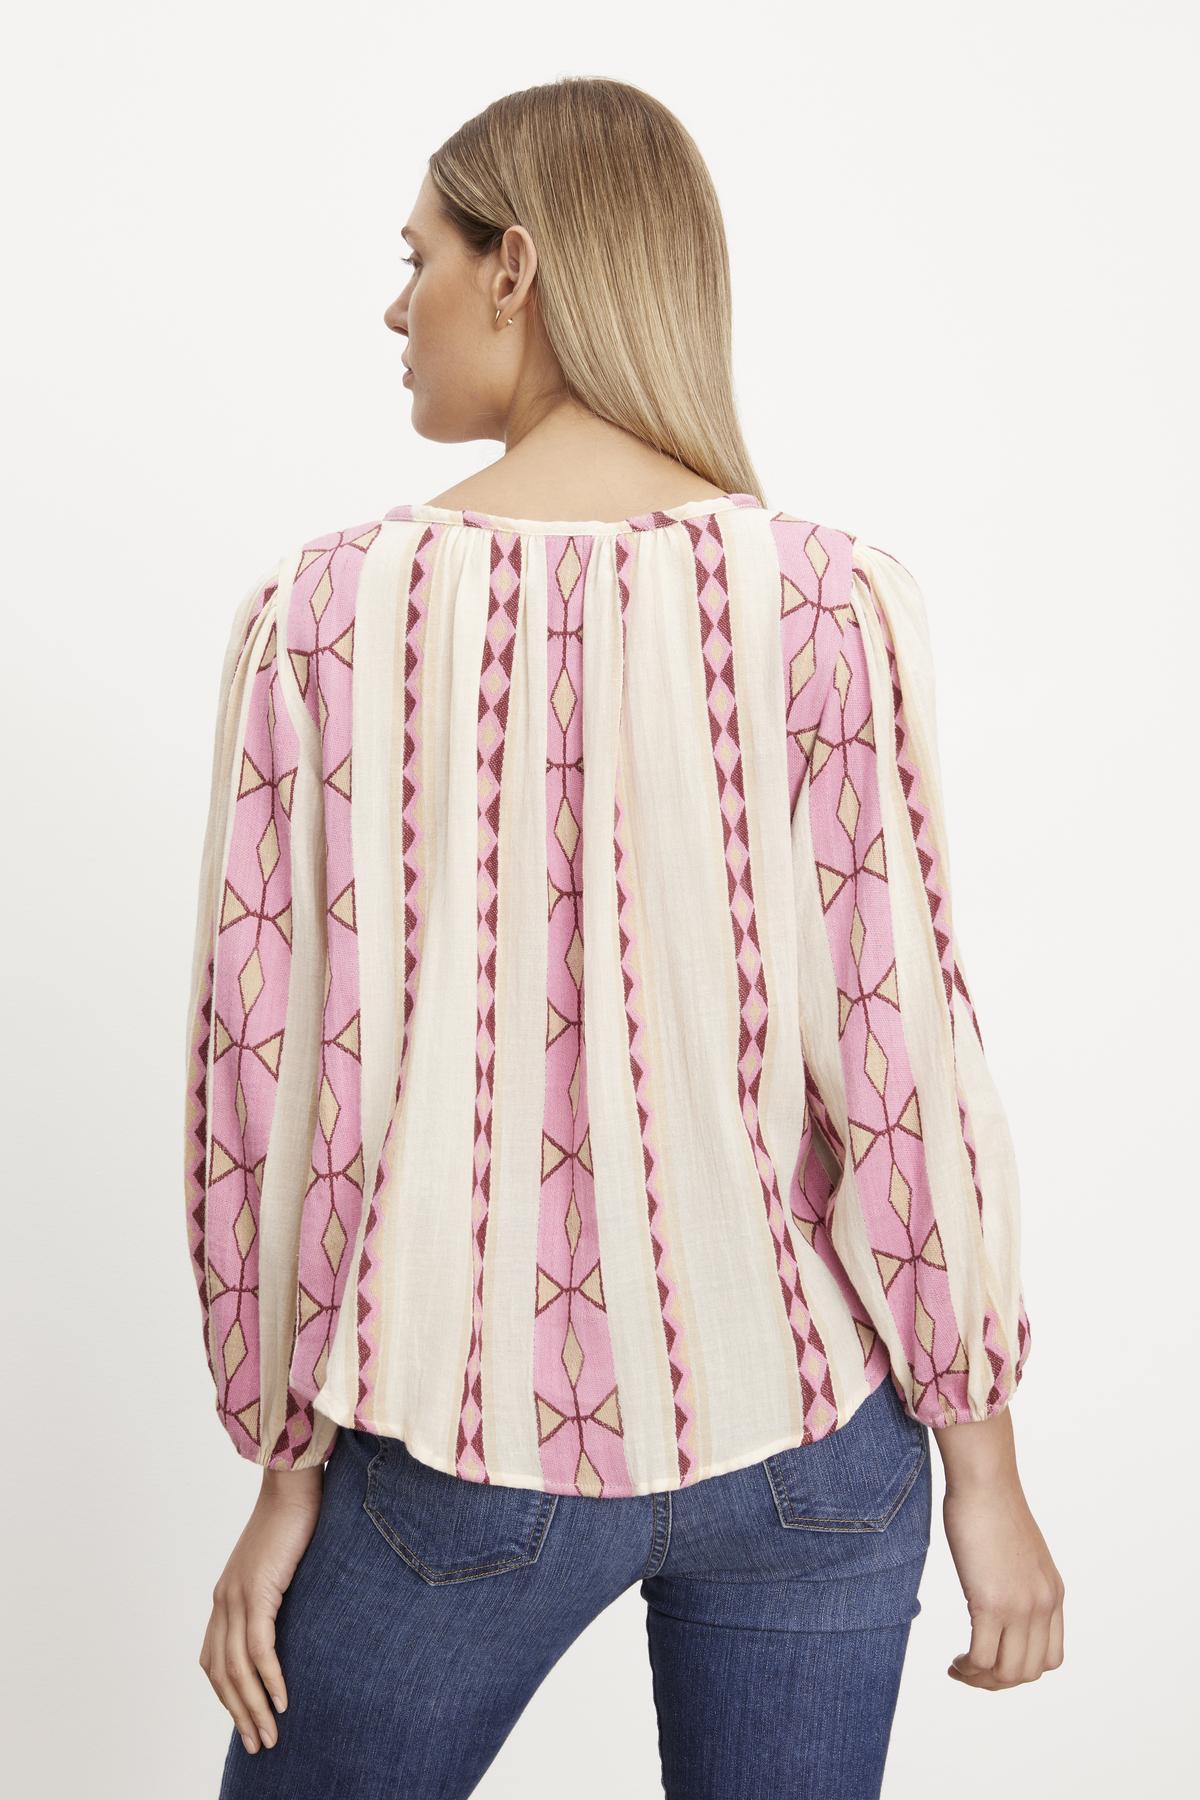   The woman is wearing a pink embroidered blouse with elastic cuffs from Velvet by Graham & Spencer. 